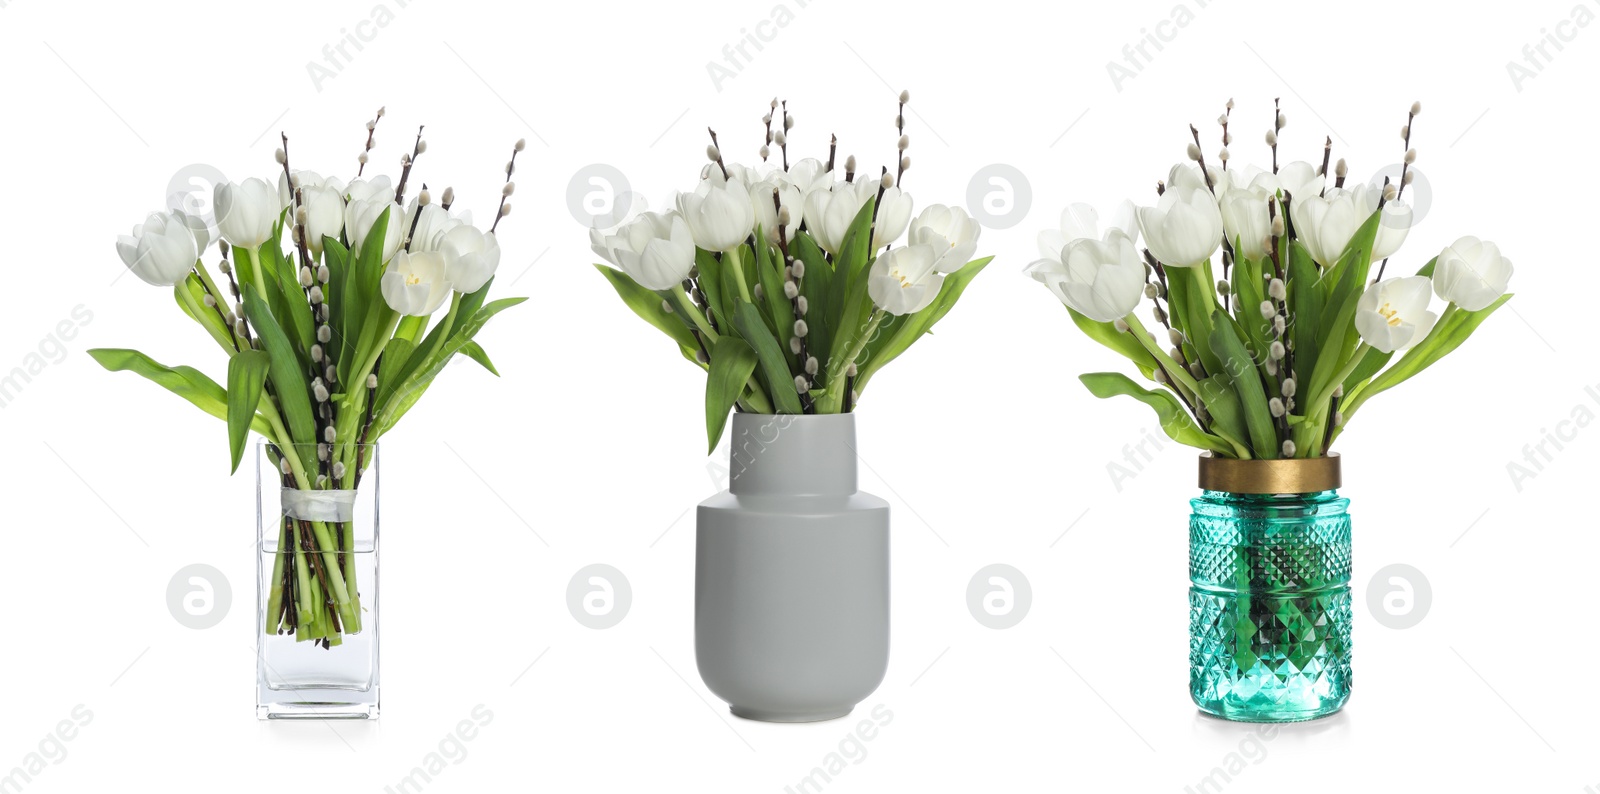 Image of Bouquets with beautiful tulip flowers in vases on white background, collage. Banner design